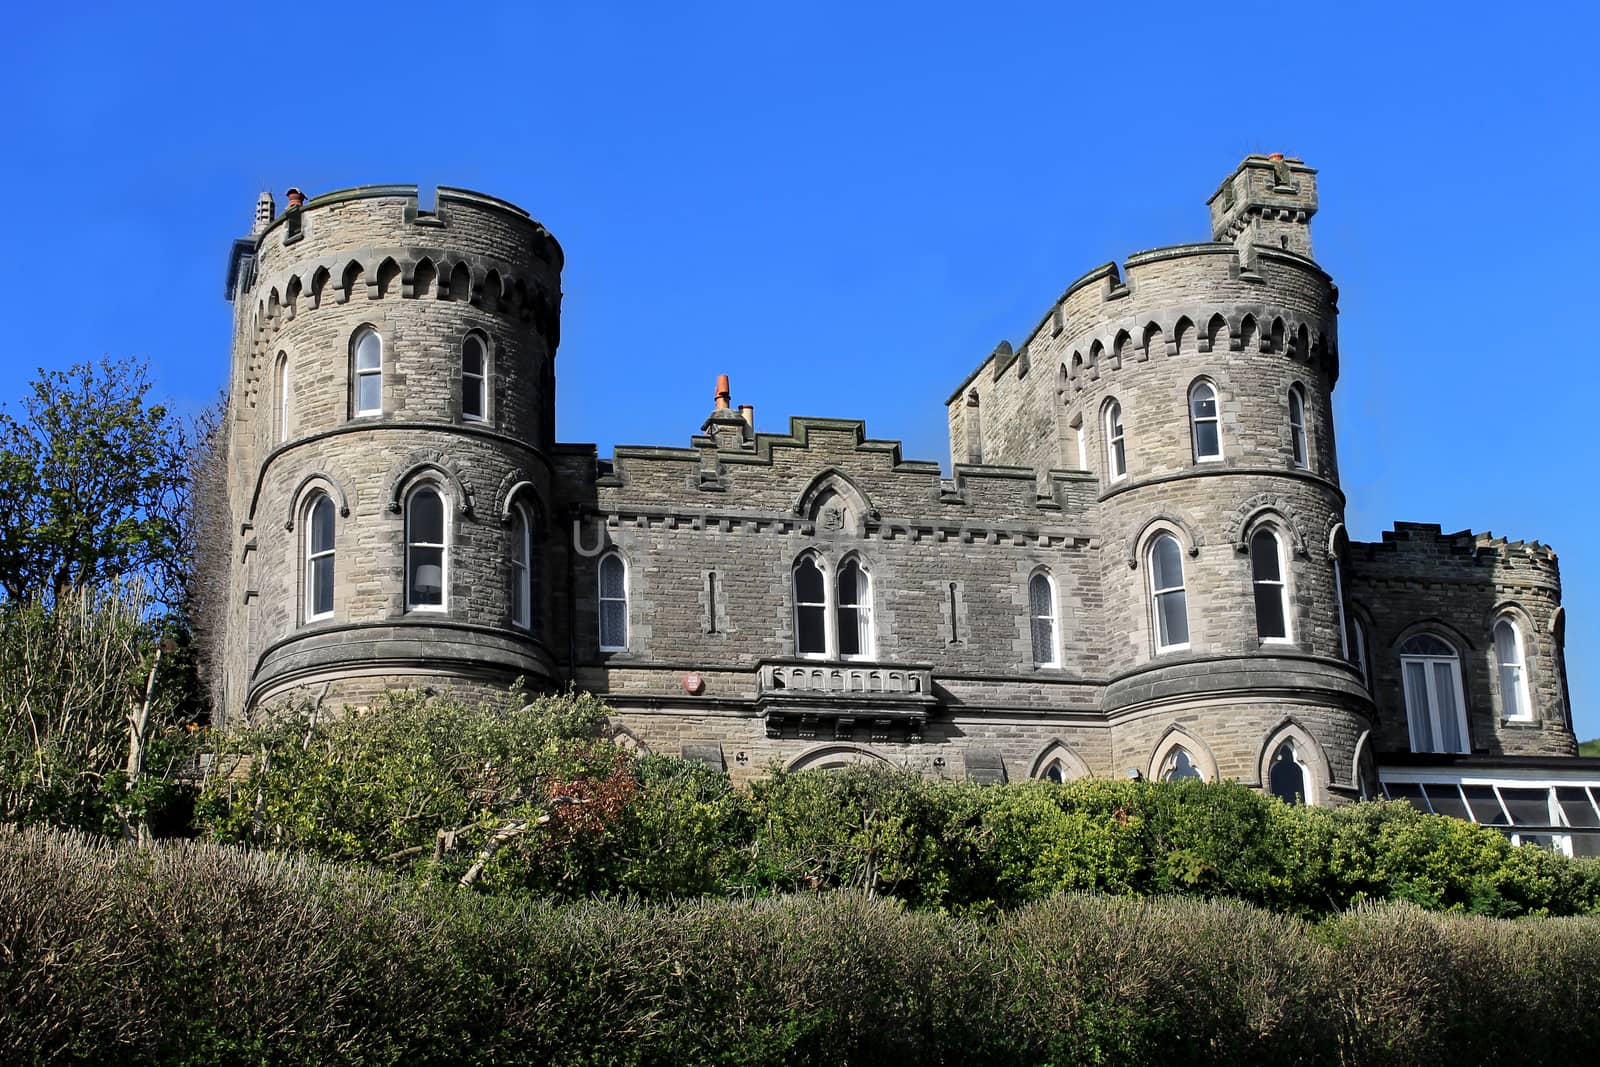 Historic English house with castle turrets, Scarborough, England.